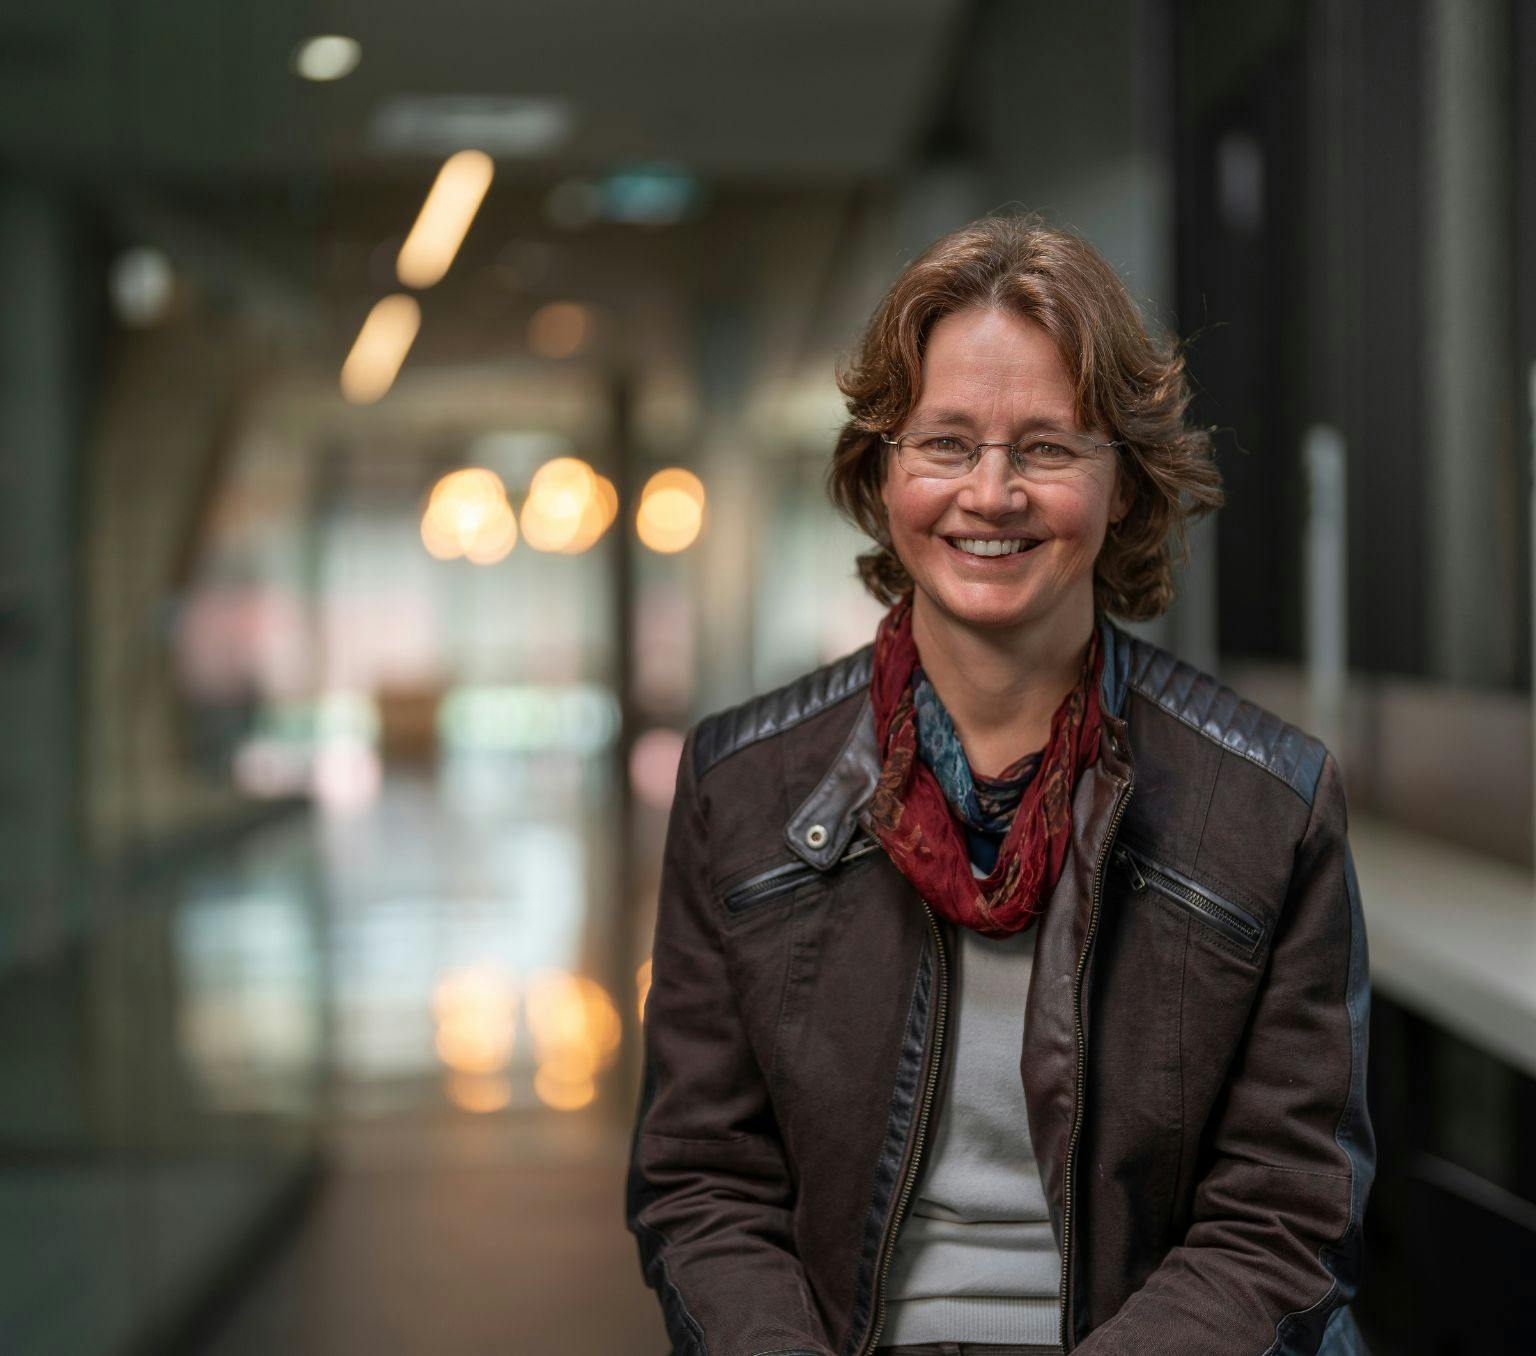 Professor Kylie Catchpole smiling and wearing a dark jacket and red necklace.